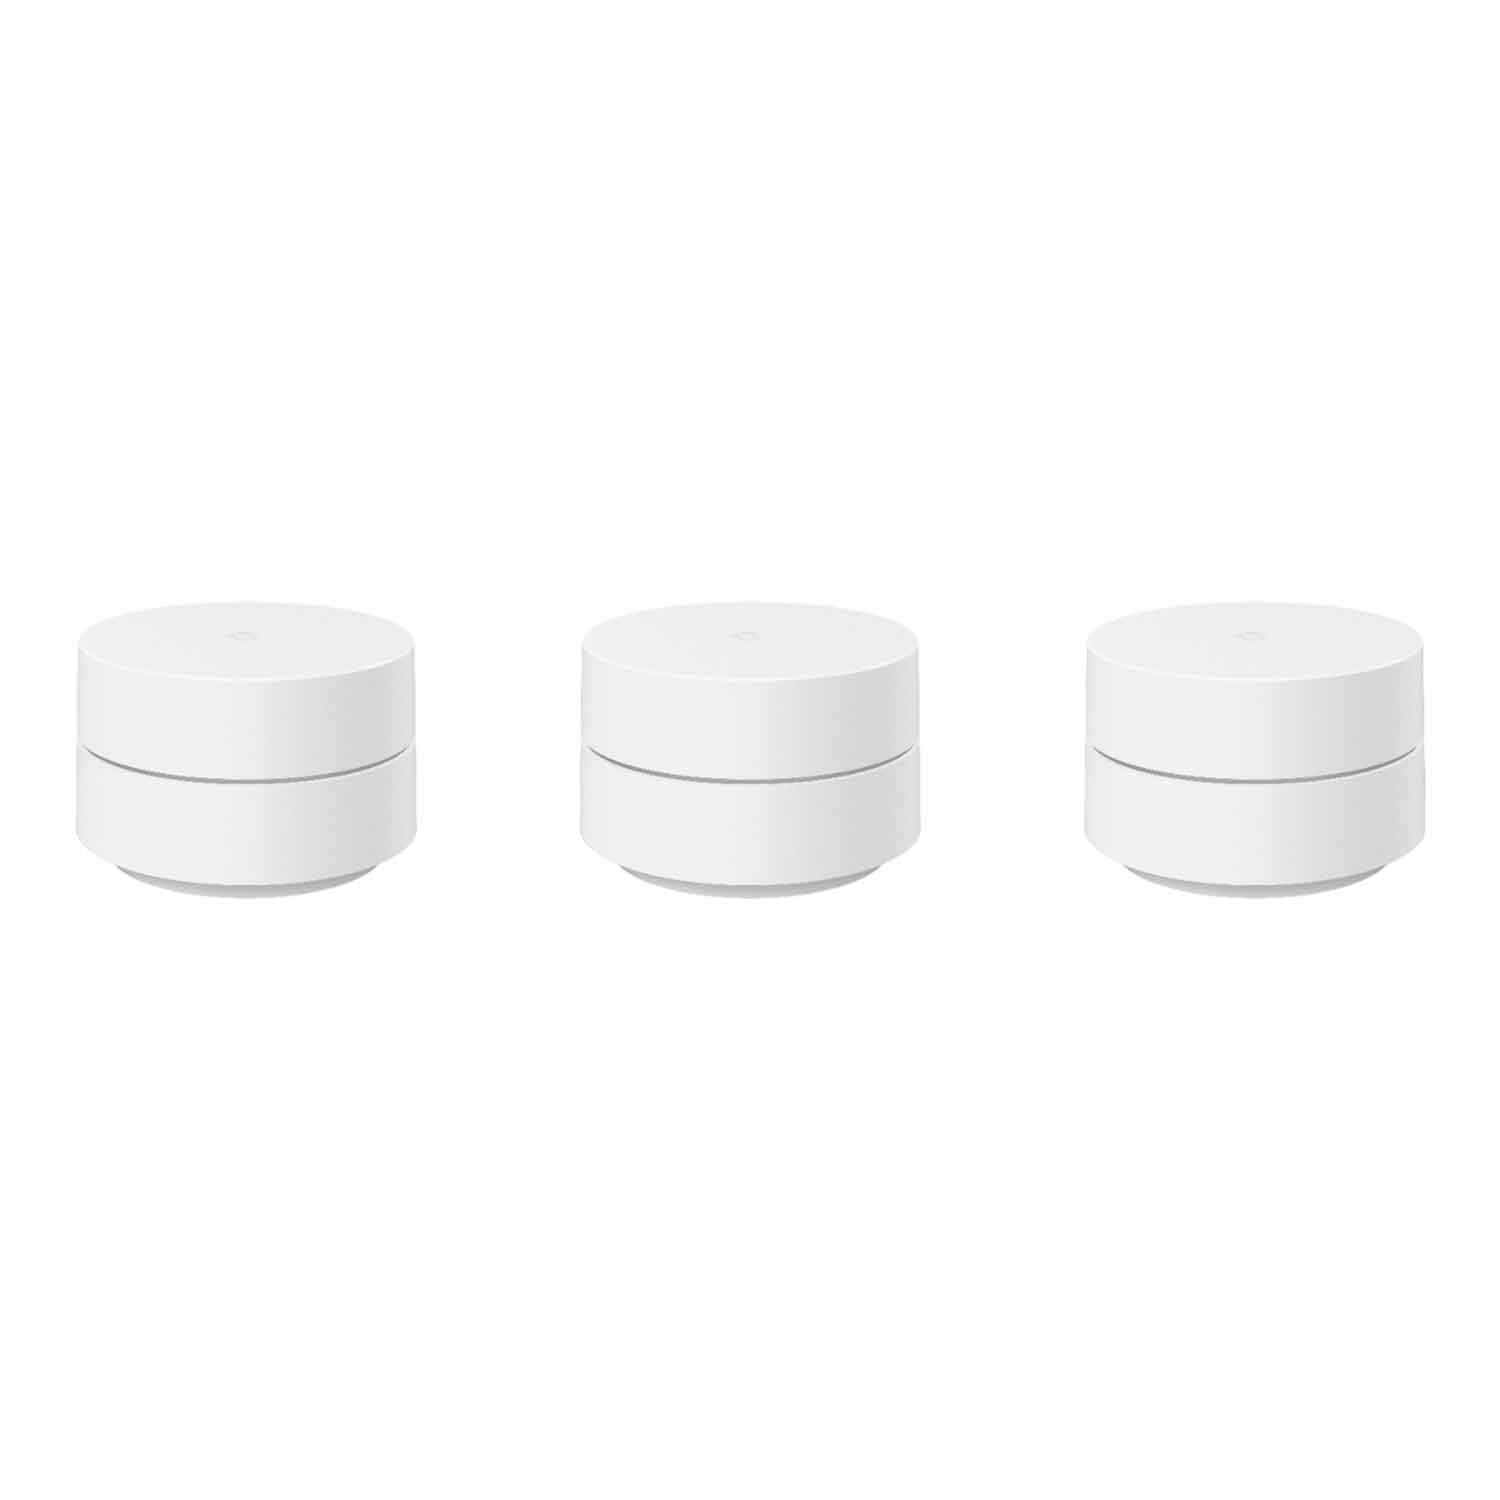 Google Nest Wi-Fi GA02434-US Whole Home Wi-Fi System 3-Pack - Wh